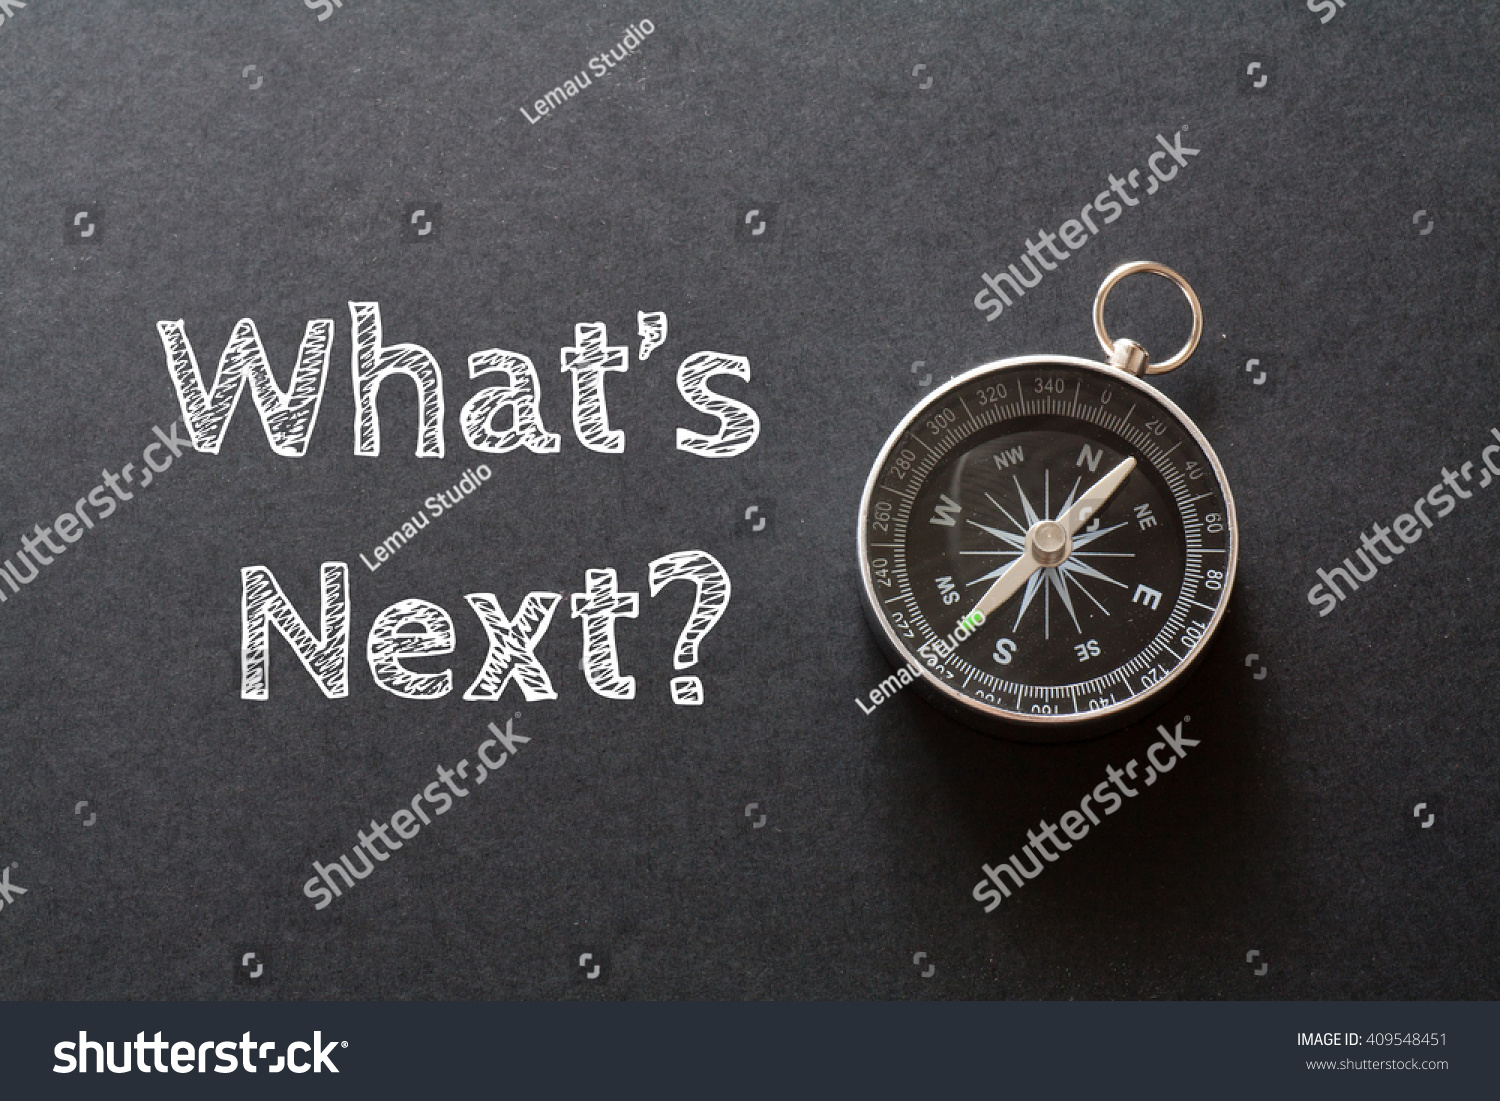 Written What's Next words on black background with compass